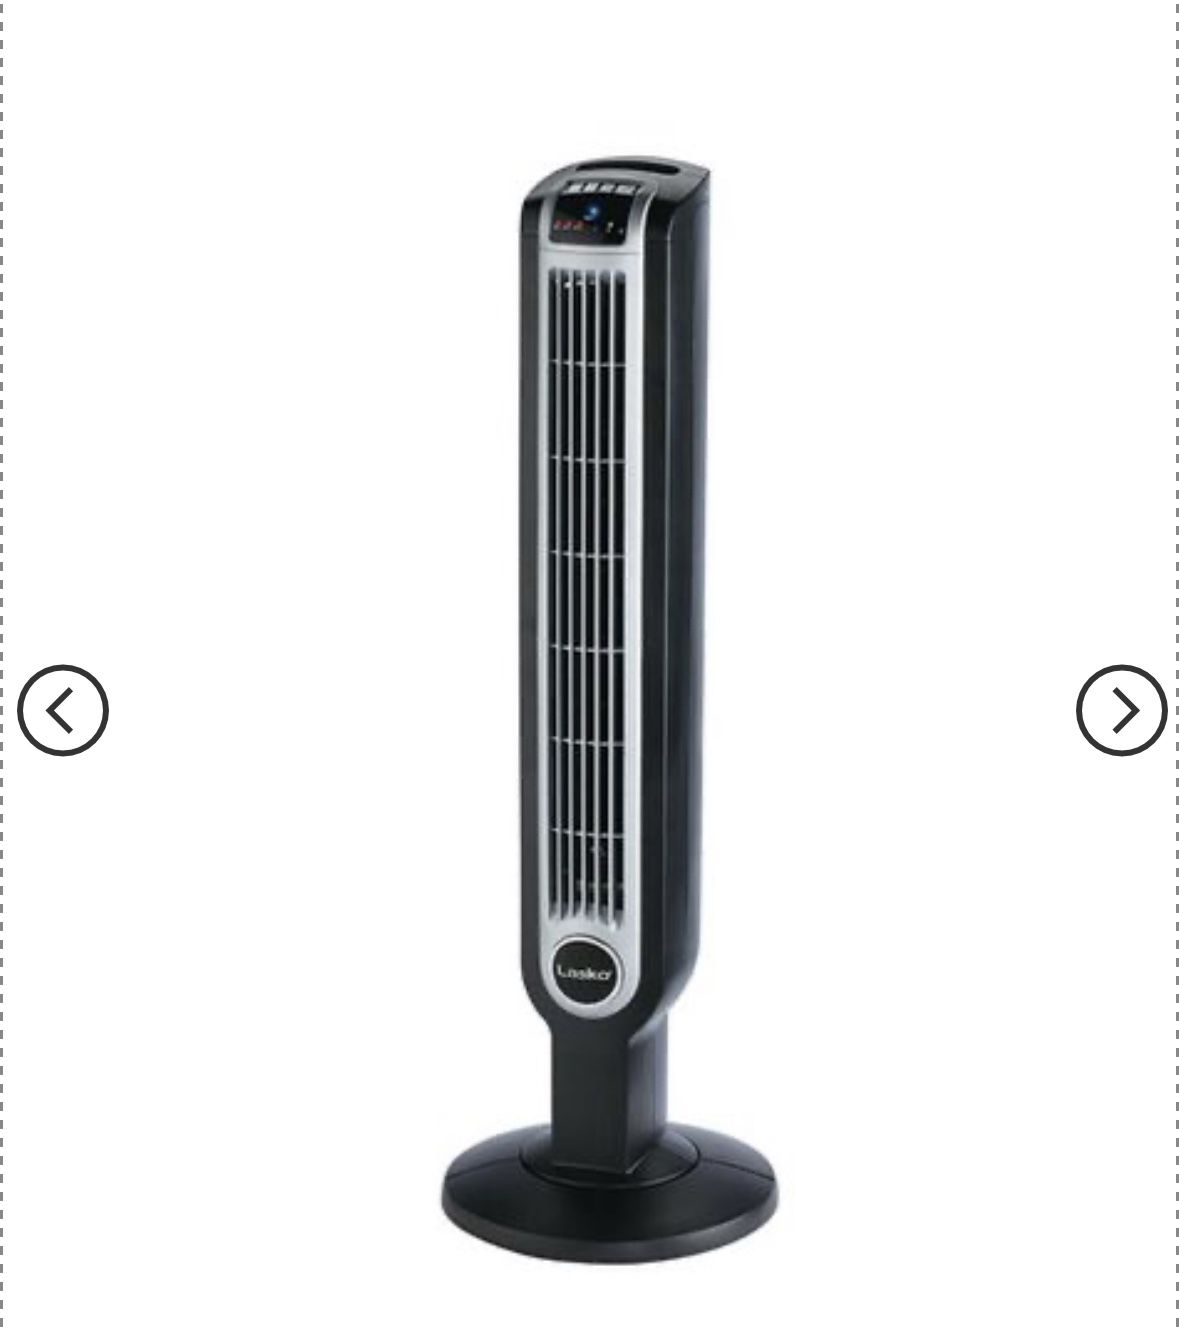 Lasko 36 Inch 3-Speed Portable Electric Remote Controlled Widespread Oscillating Quiet Tower Fan and Ionizer with 7 Hour Touch Timer, Black